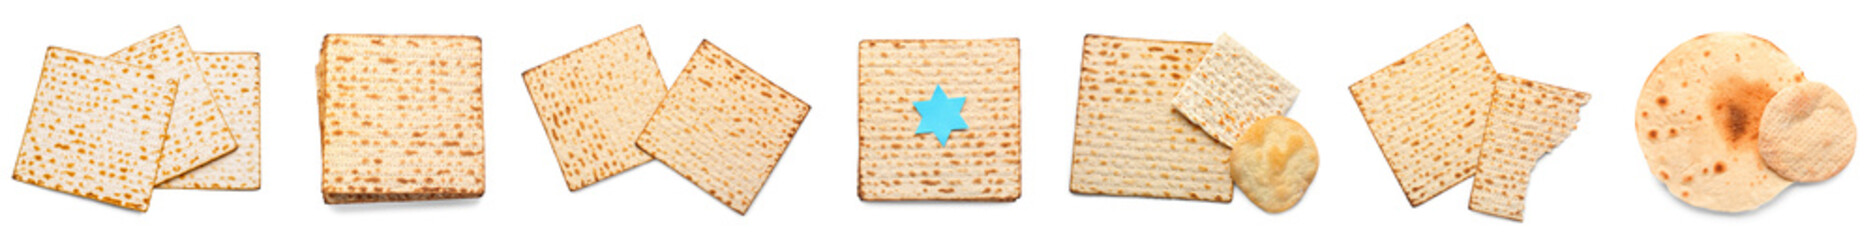 Set of Jewish flatbread matza for Passover on white background, top view